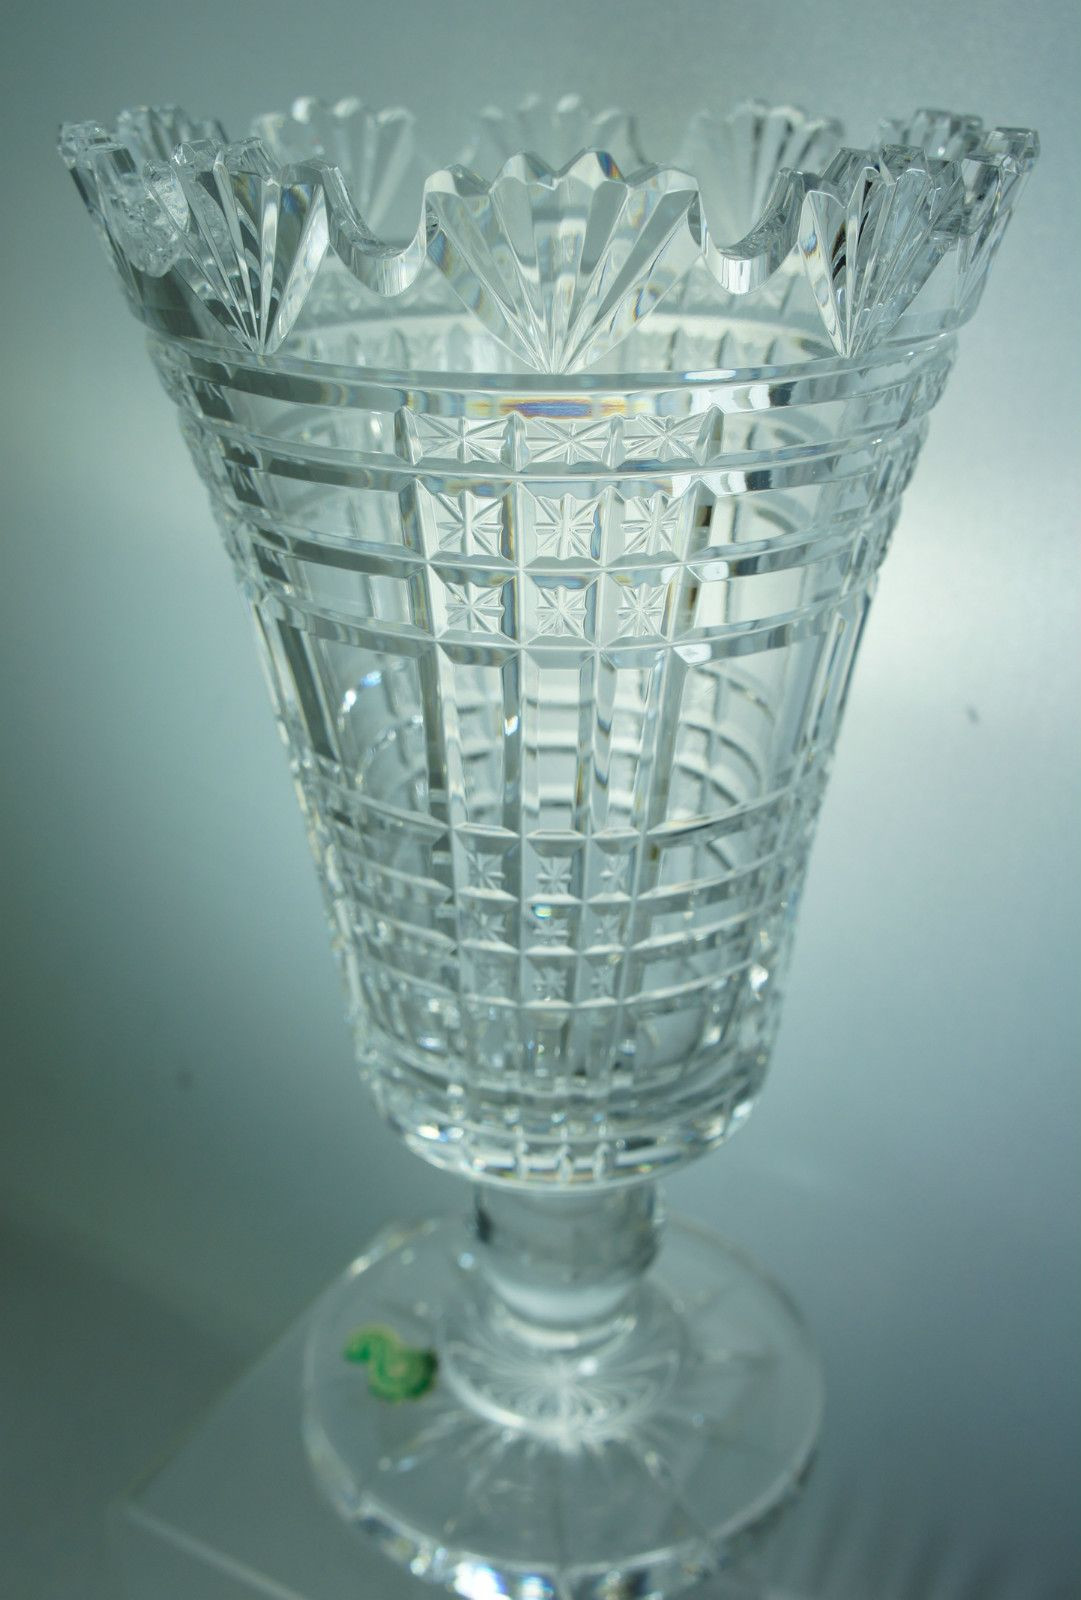 24 Fabulous Waterford Bud Vase 2024 free download waterford bud vase of antique waterford crystal vases best 2000 antique decor ideas with regard to vintage waterford crystal footed vase sharp scalloped edges